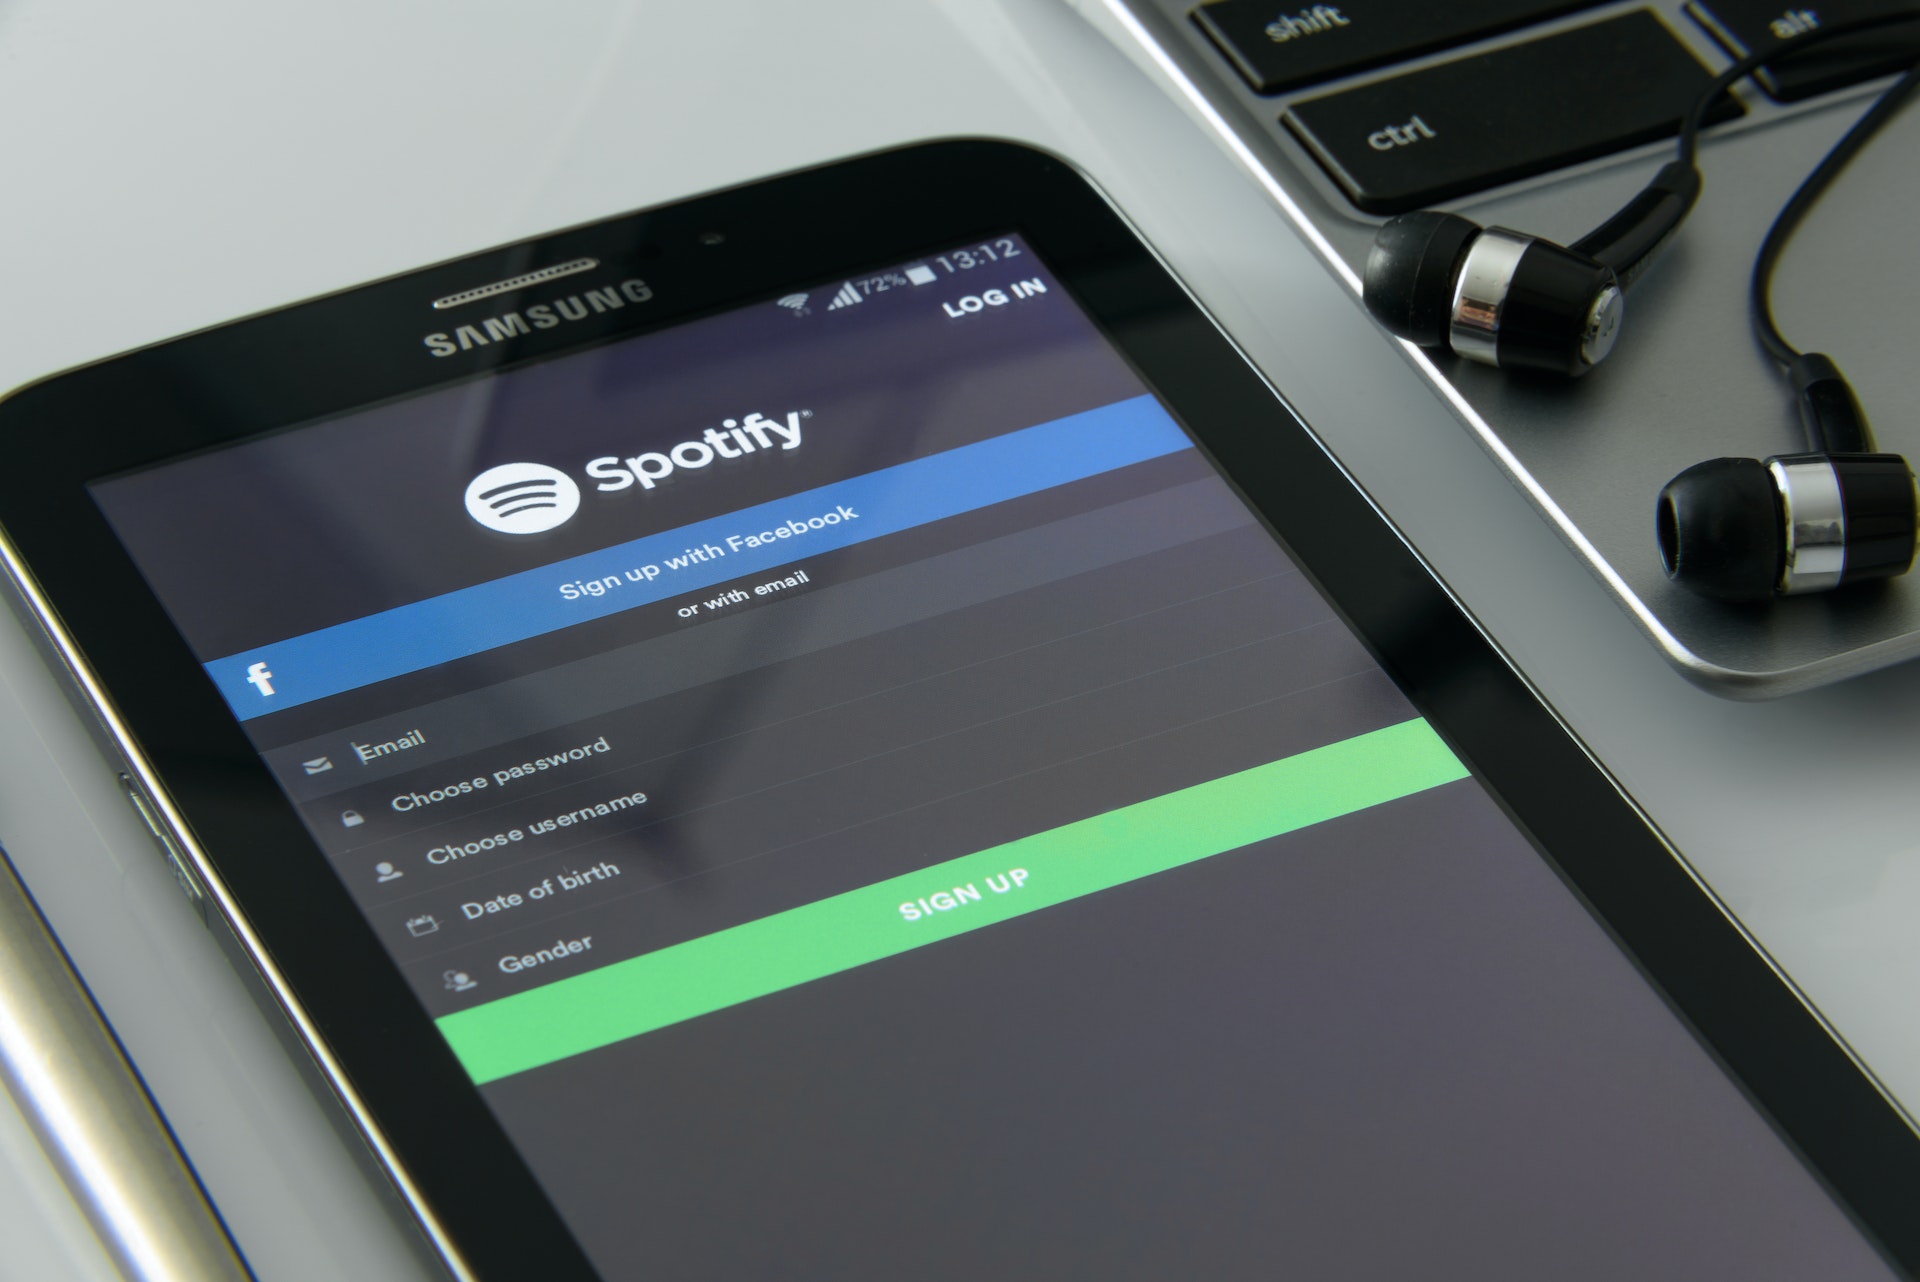 Can You Download Backing Tracks From Spotify? Downloading music from Spotify, Download Backing Tracks From Spotify